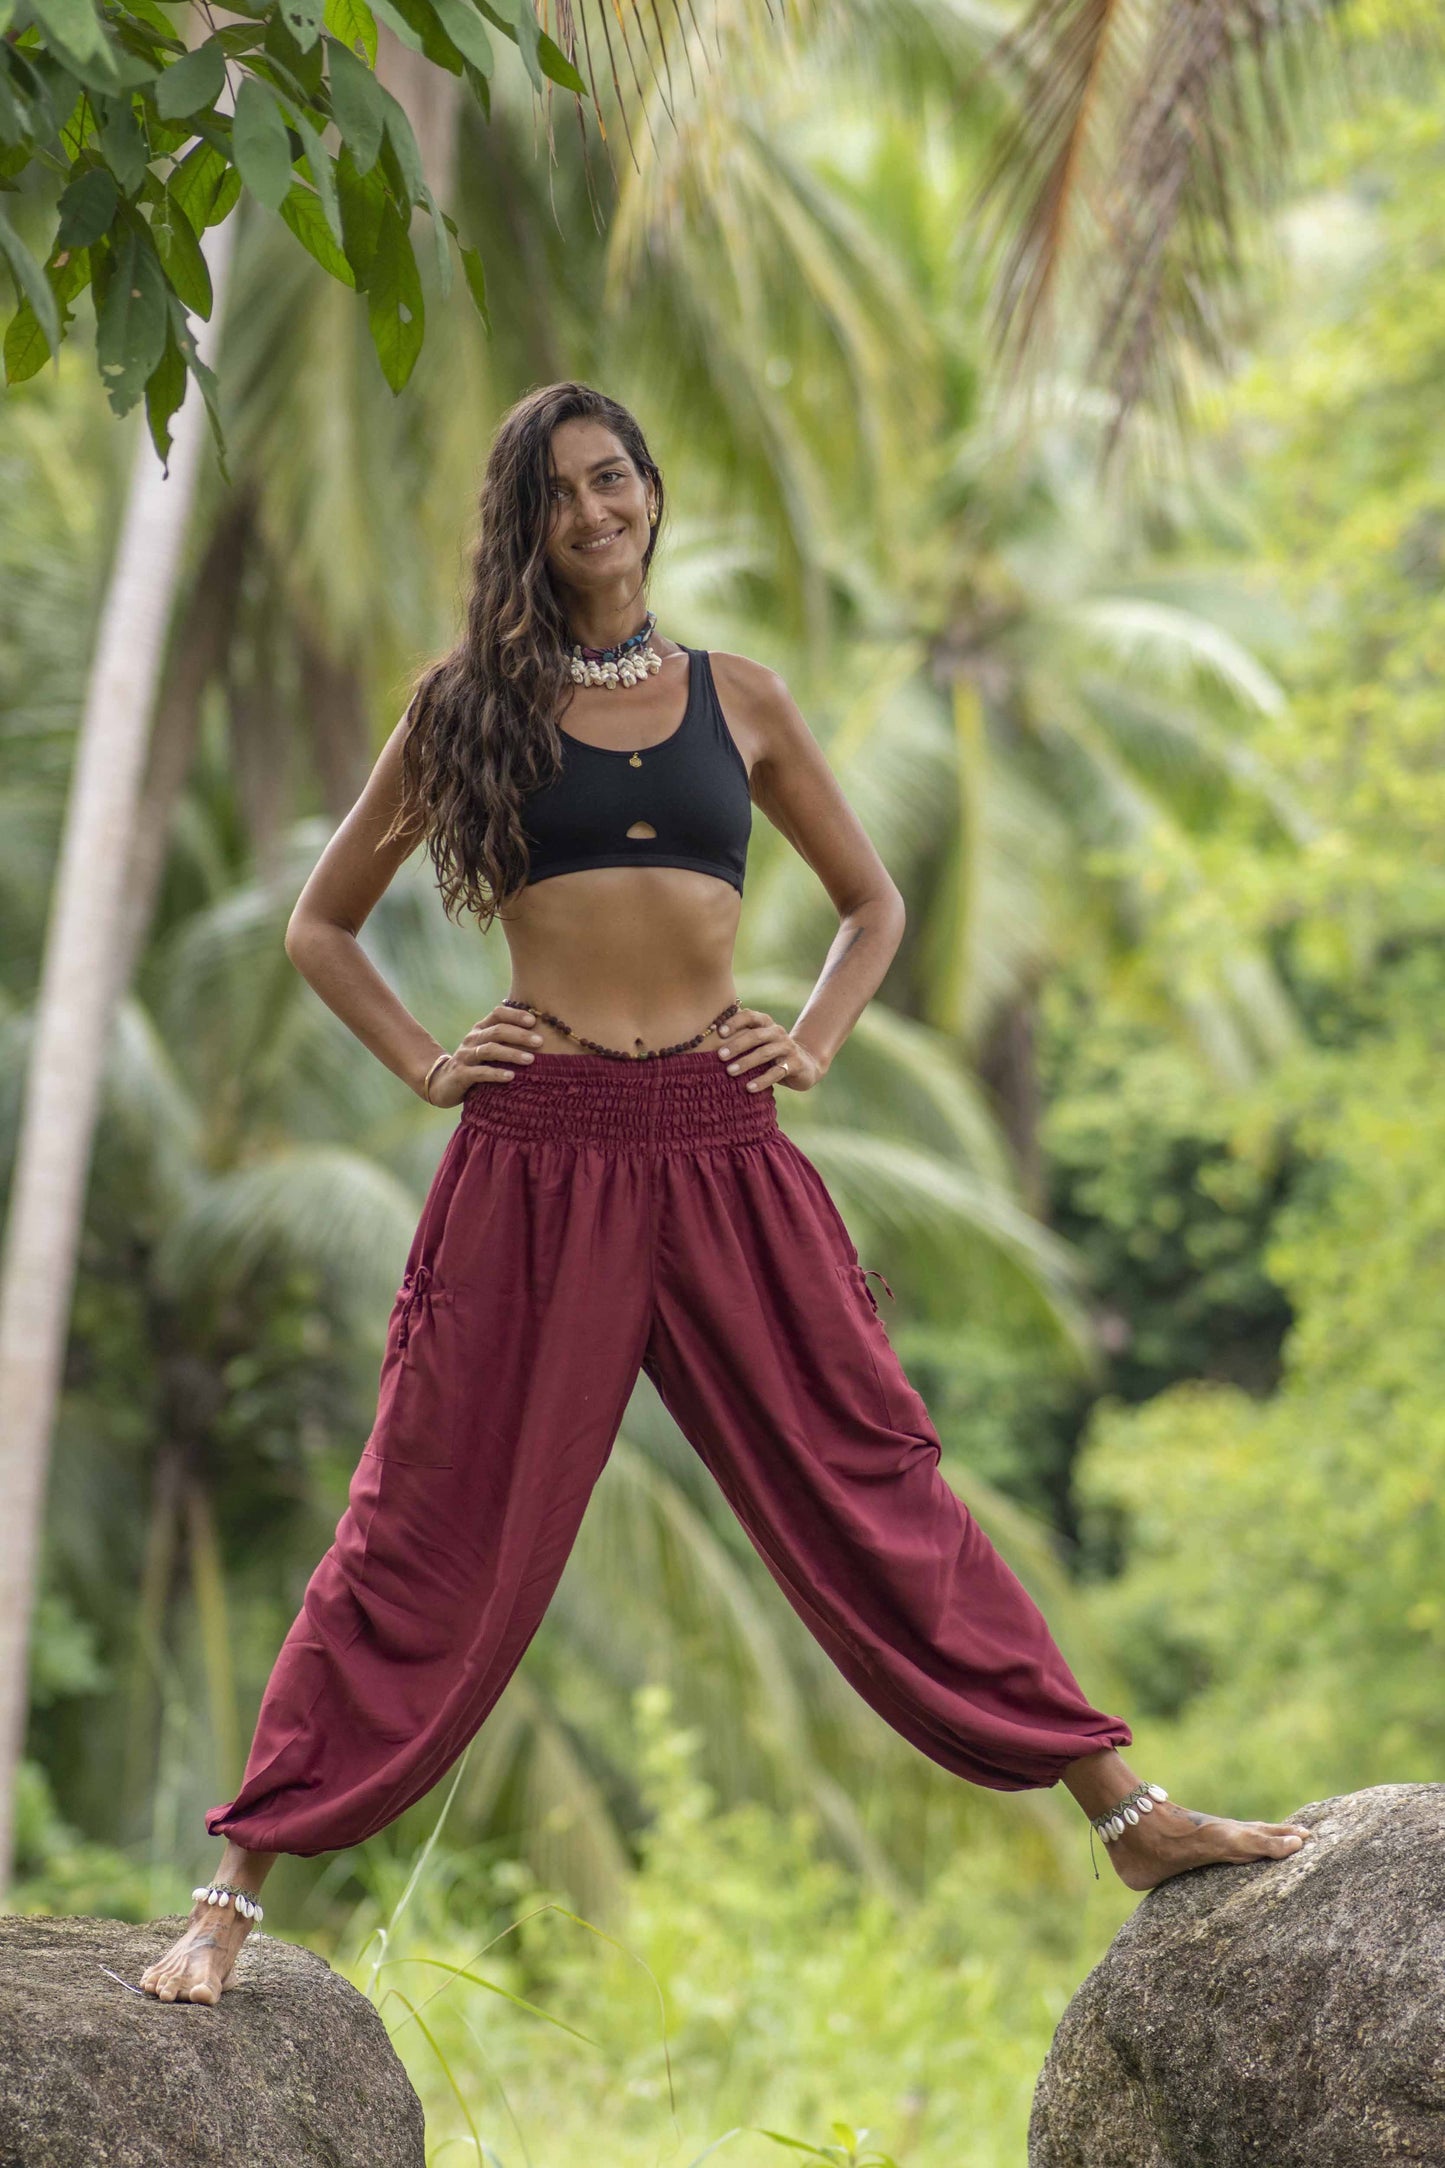 airy monochrome harem pants in red 